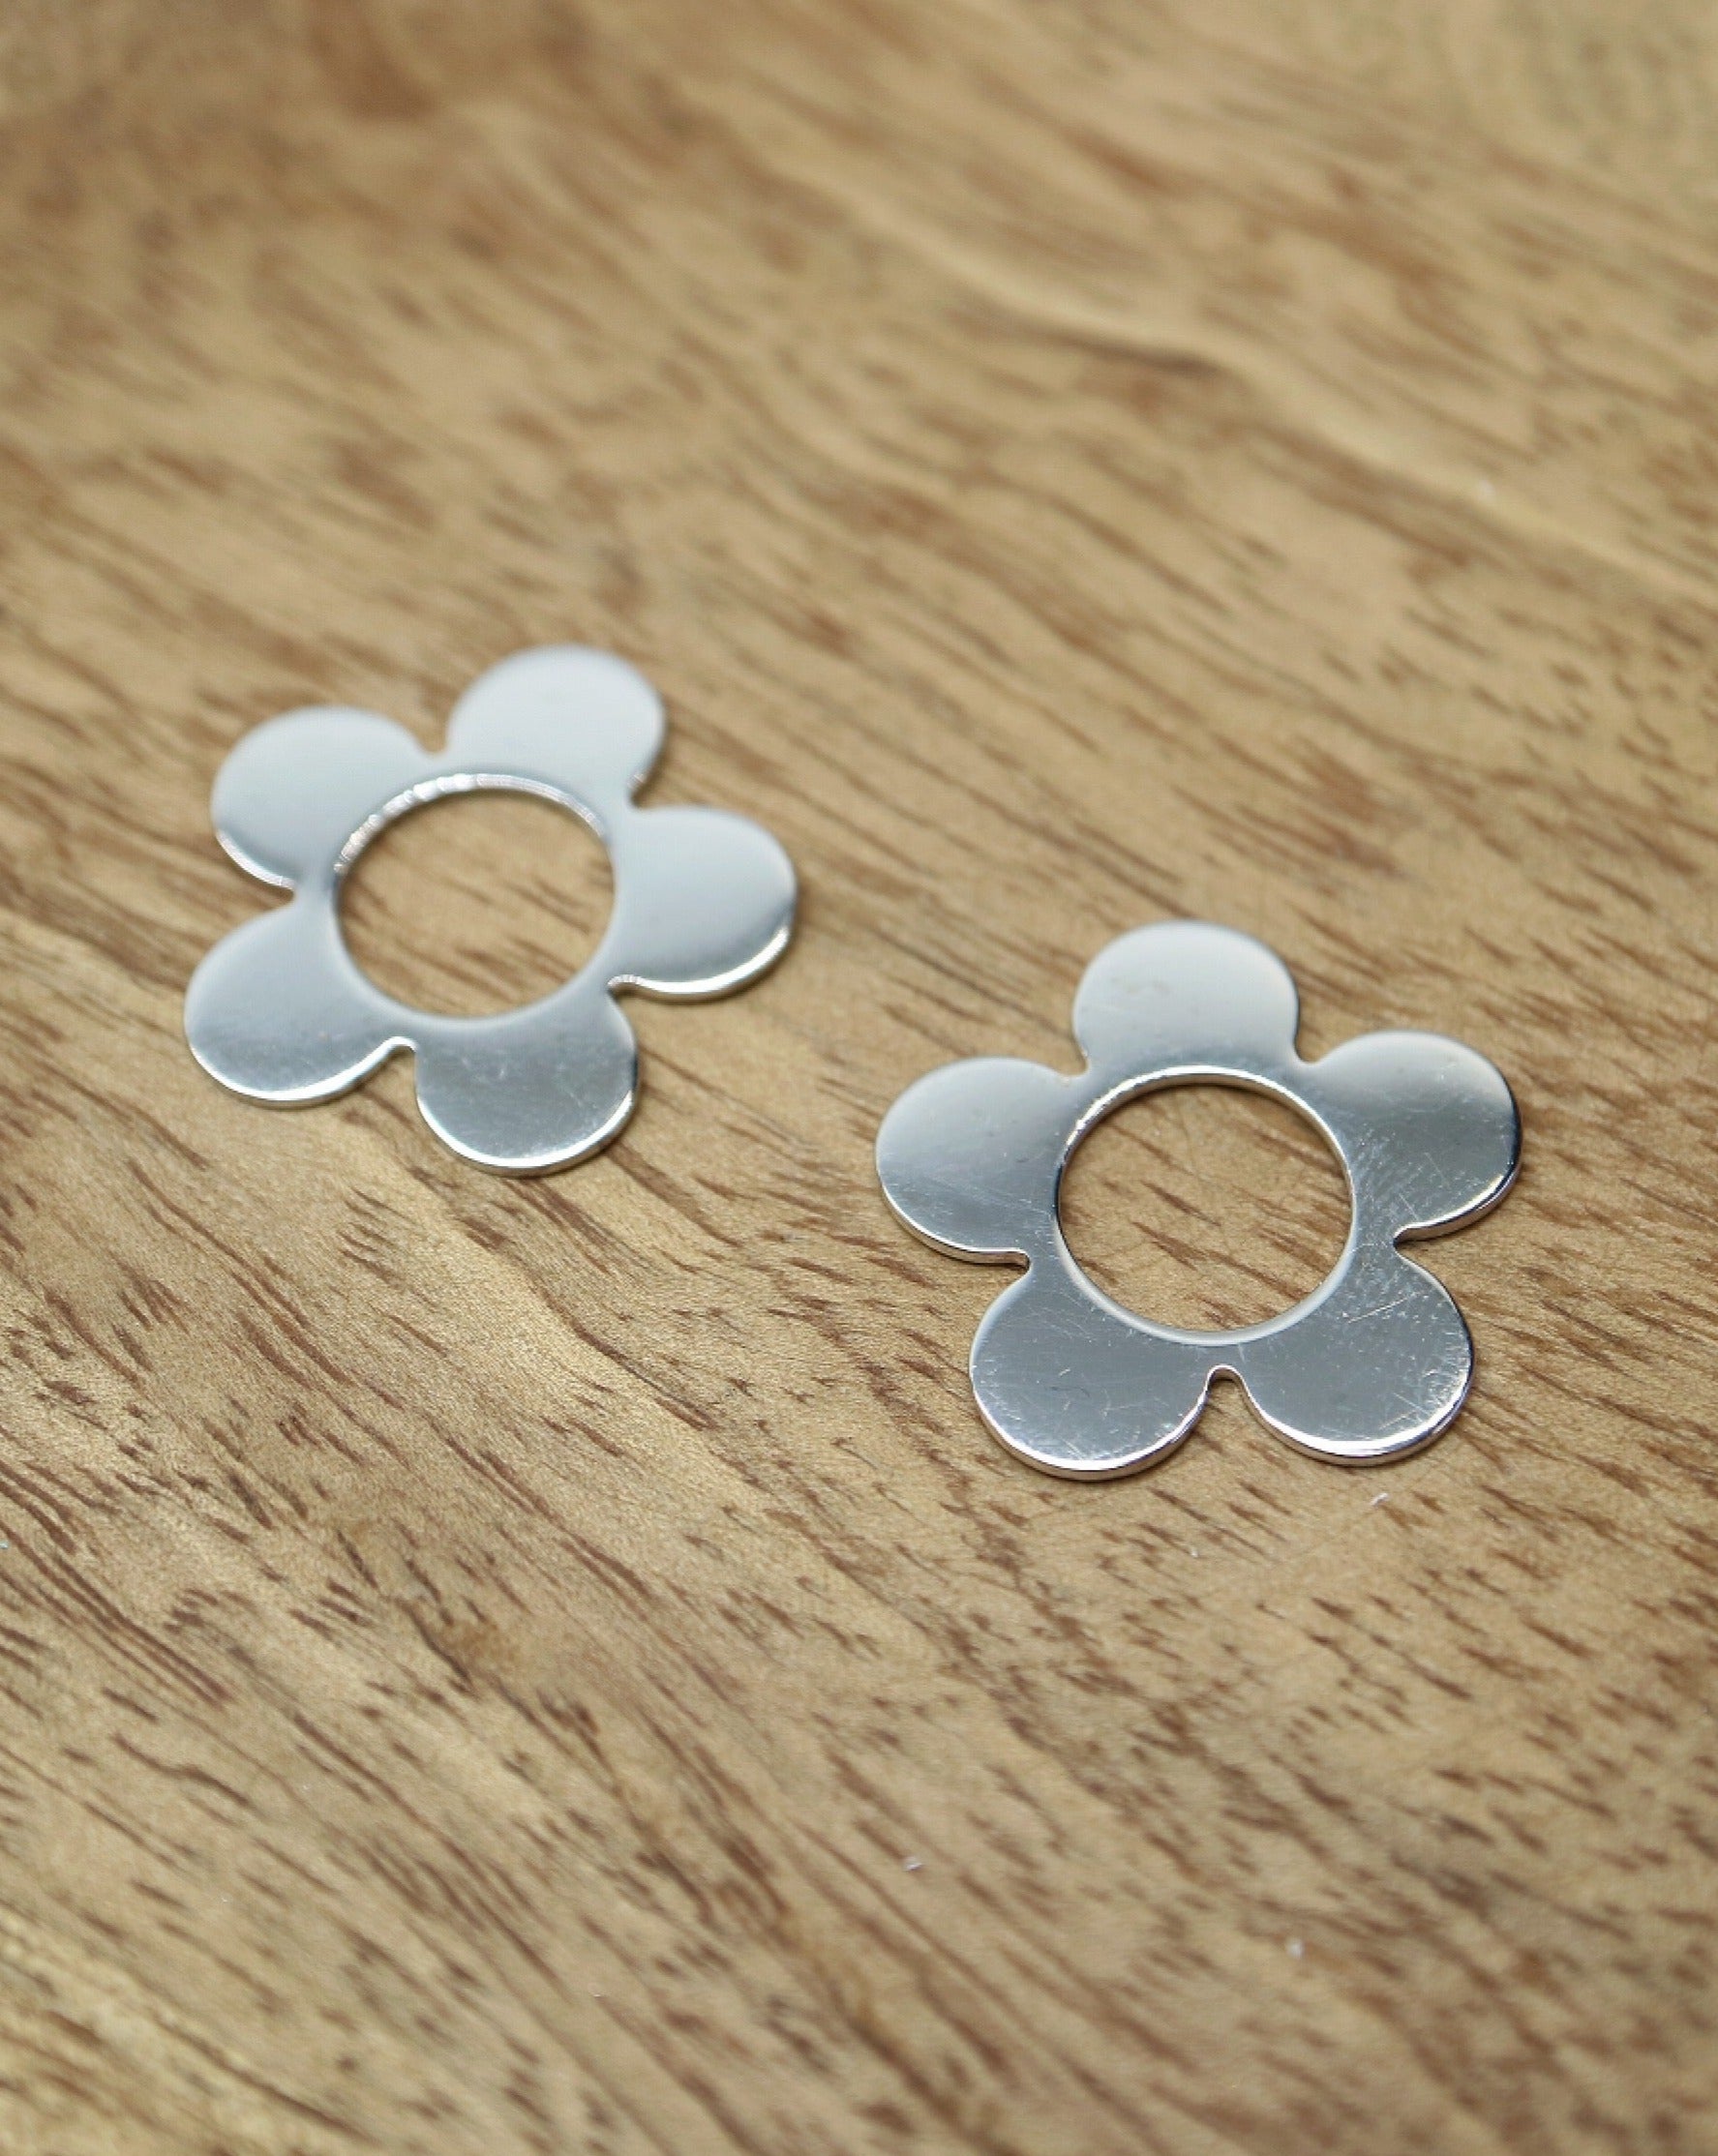 10Pcs Gold Plated CZ Pave Daisy Flower Charms Pendants For